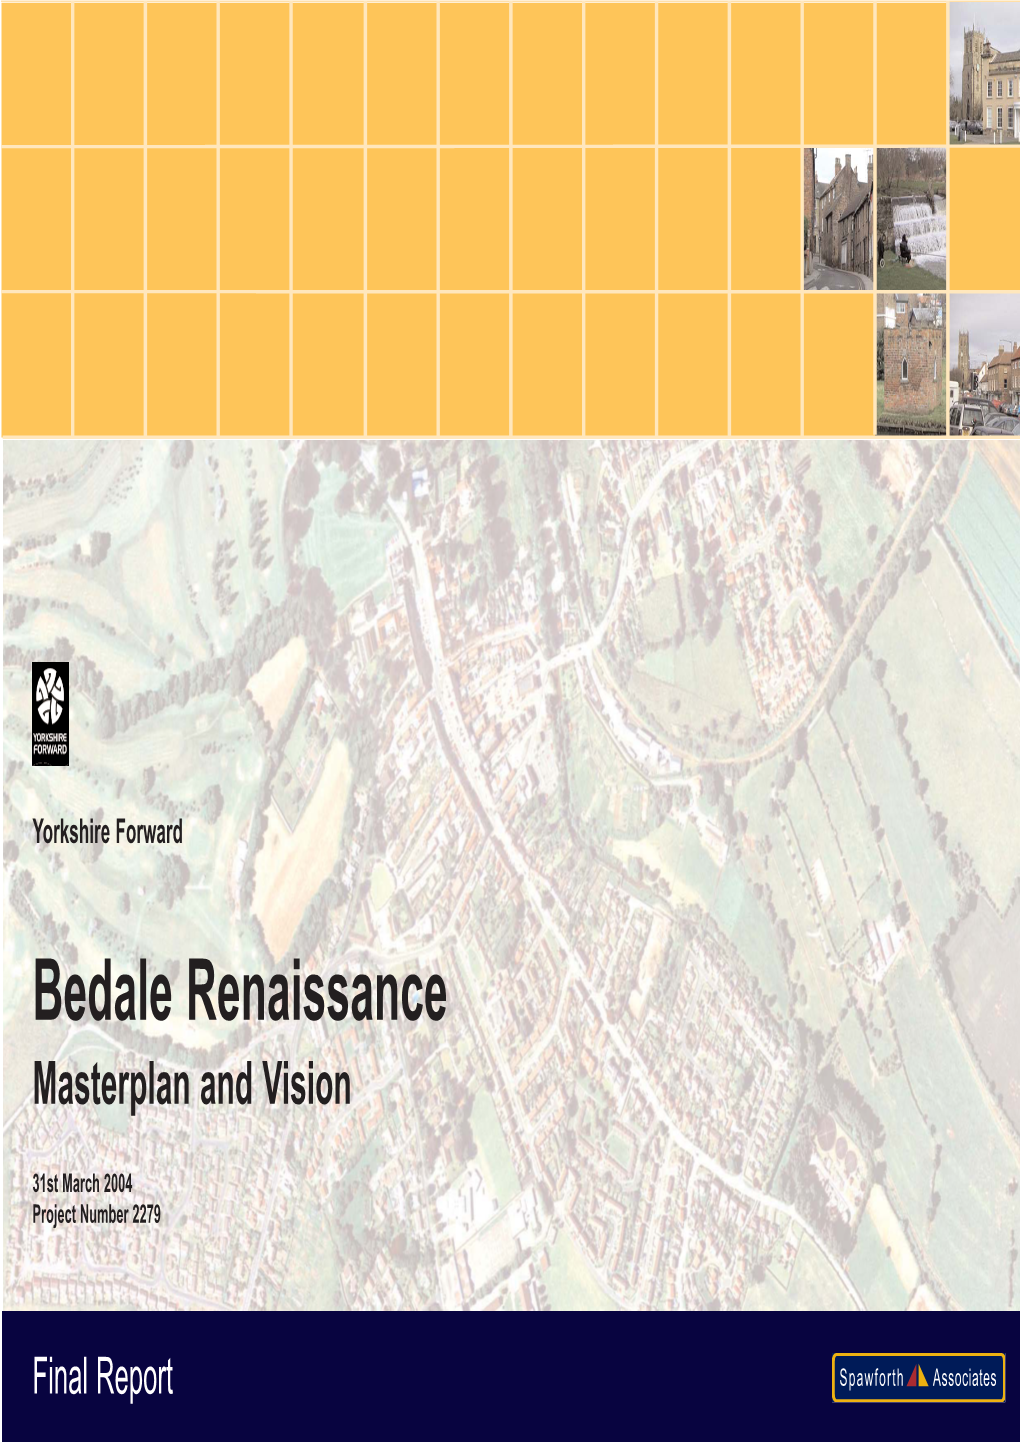 SD53 Bedale Renaissance Masterplan and Vision